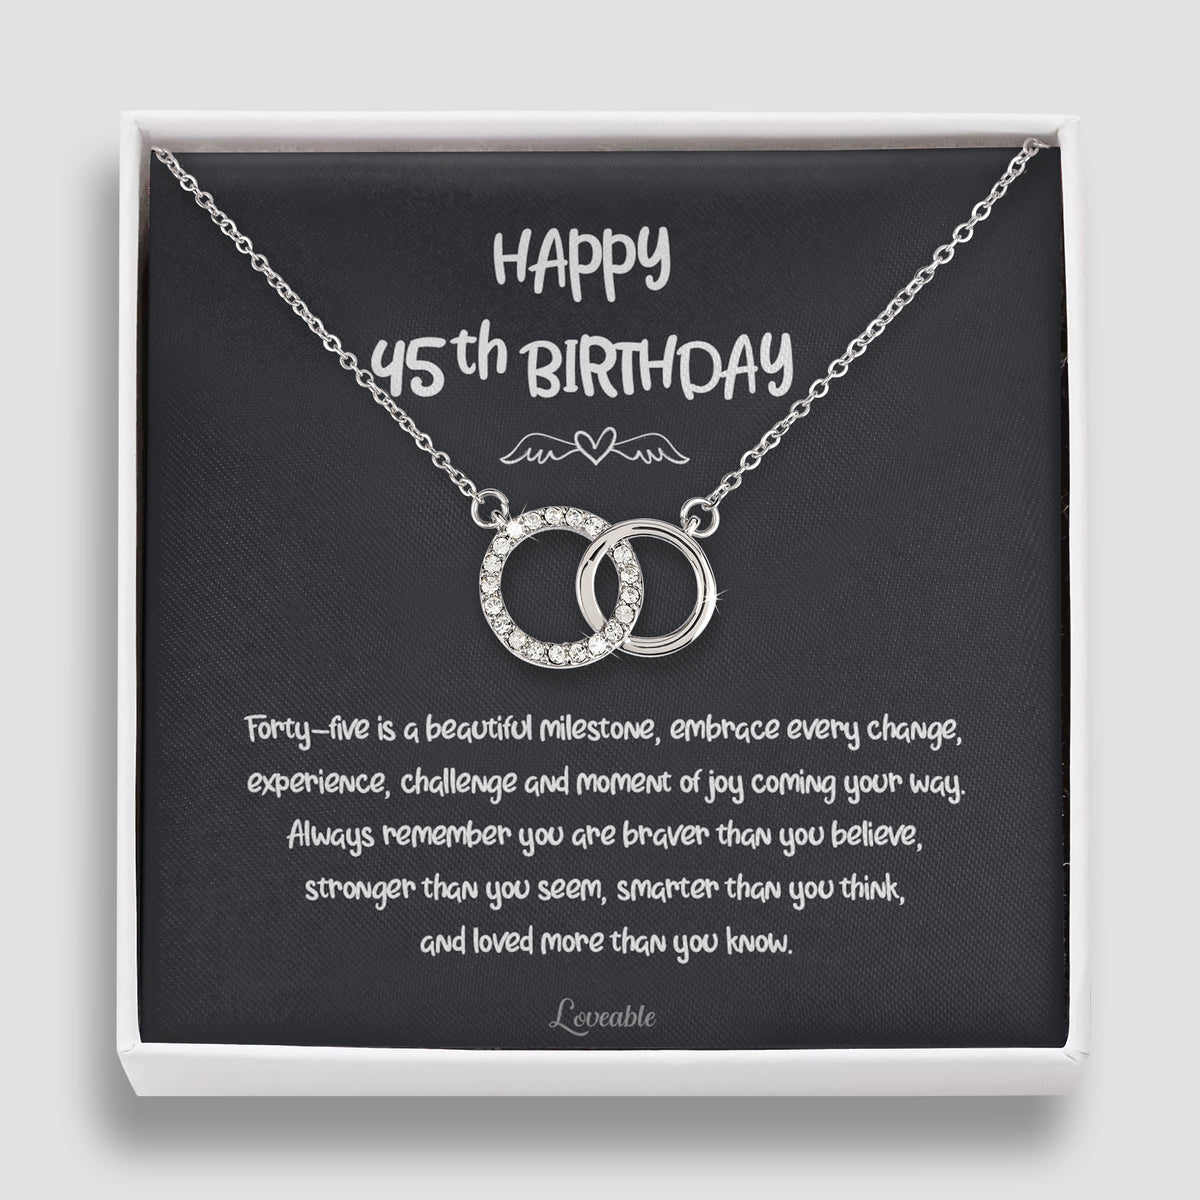 Happy 45th Birthday Personalized Necklace